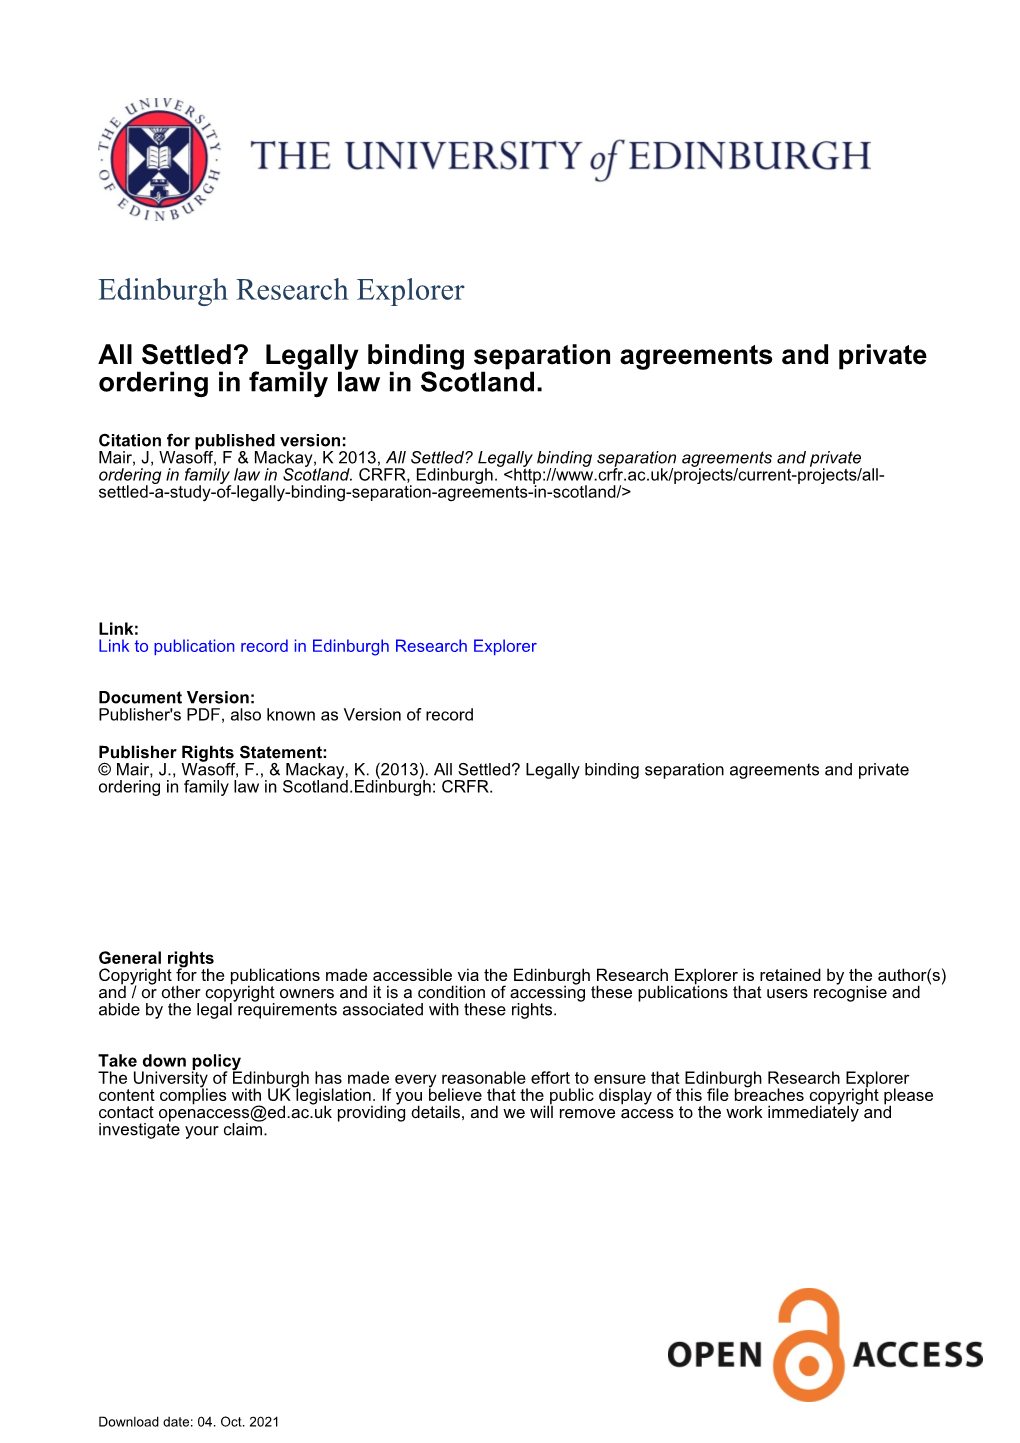 Legally Binding Separation Agreements and Private Ordering in Family Law in Scotland